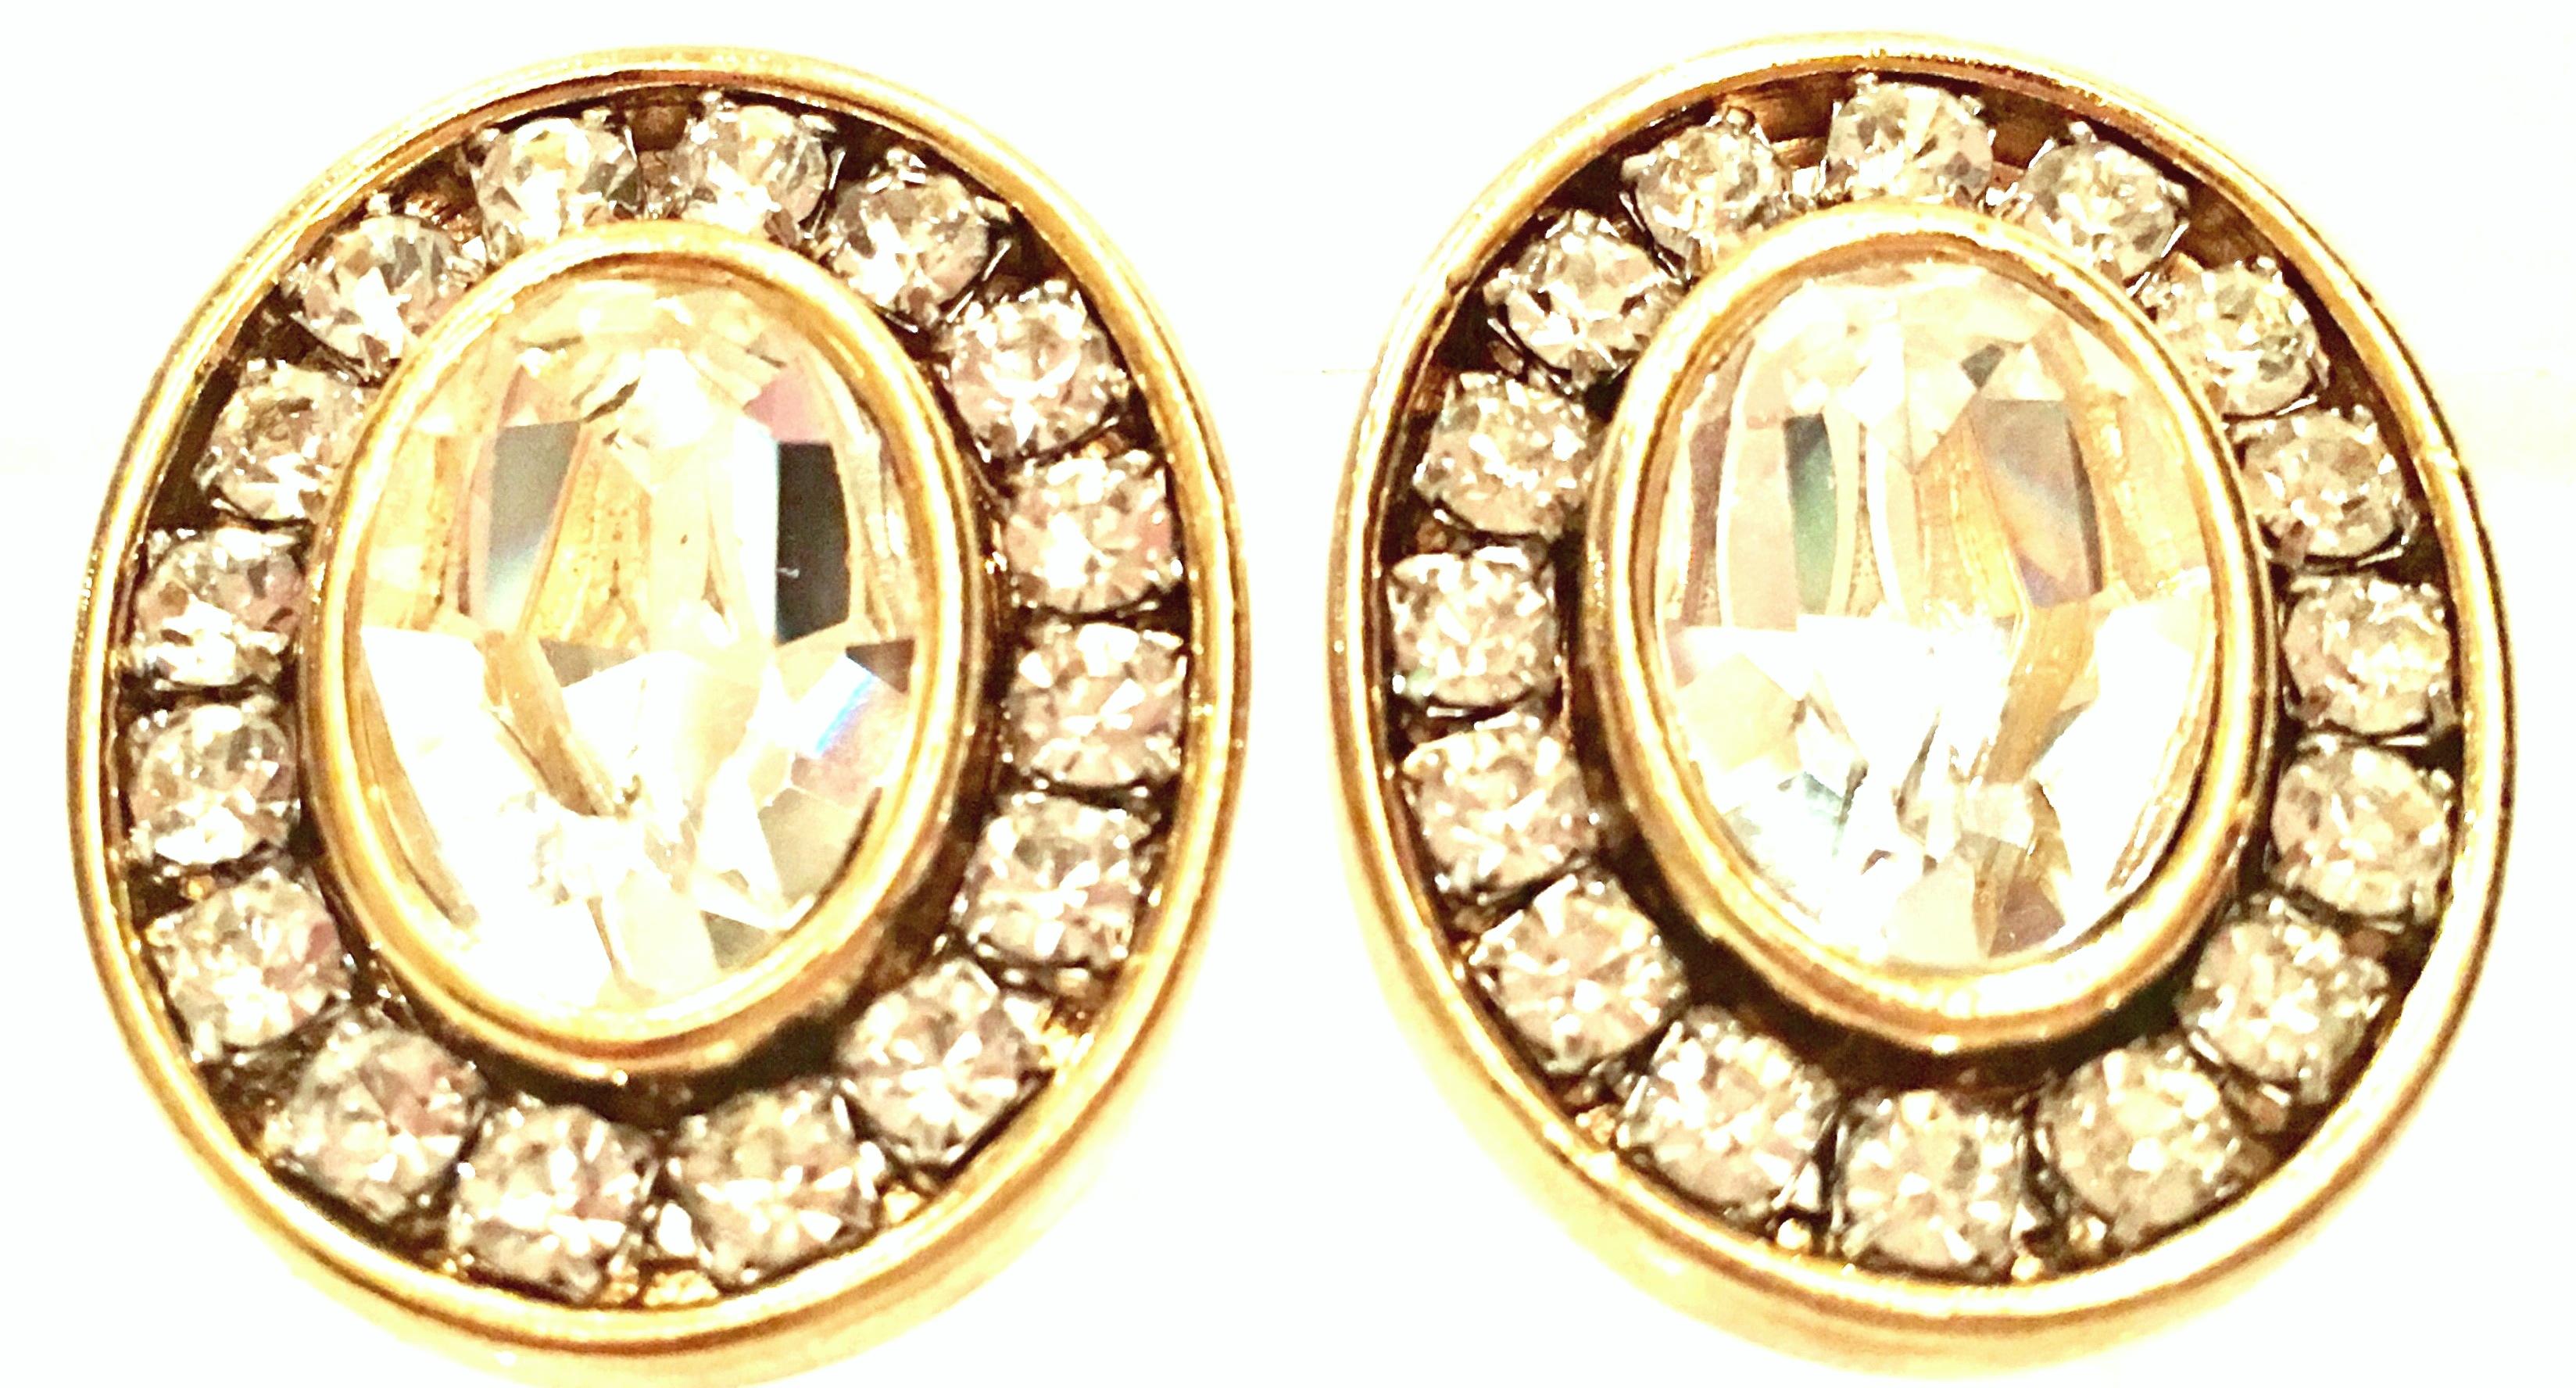 20th Century Gold Plate & Swarovski Crystal Earrings By, Givenchy.  These finely crafted gold plate earrings feature, channel prong set colorless stones with a large cut and faceted central stone of approximately, .50